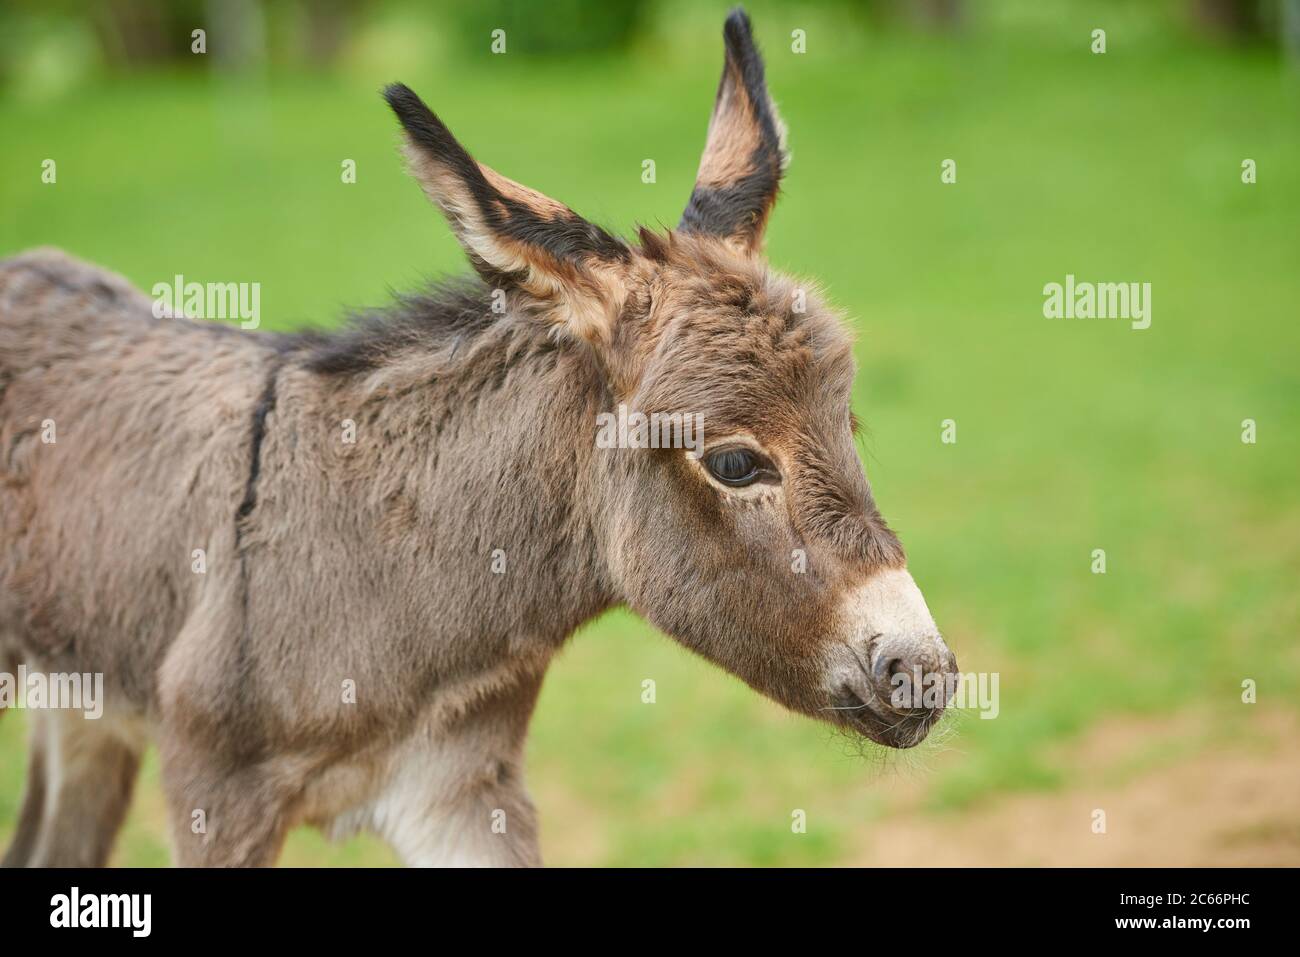 Donkey, Equus asinus asinus, foal in a meadow, close-up, detail Stock Photo  - Alamy